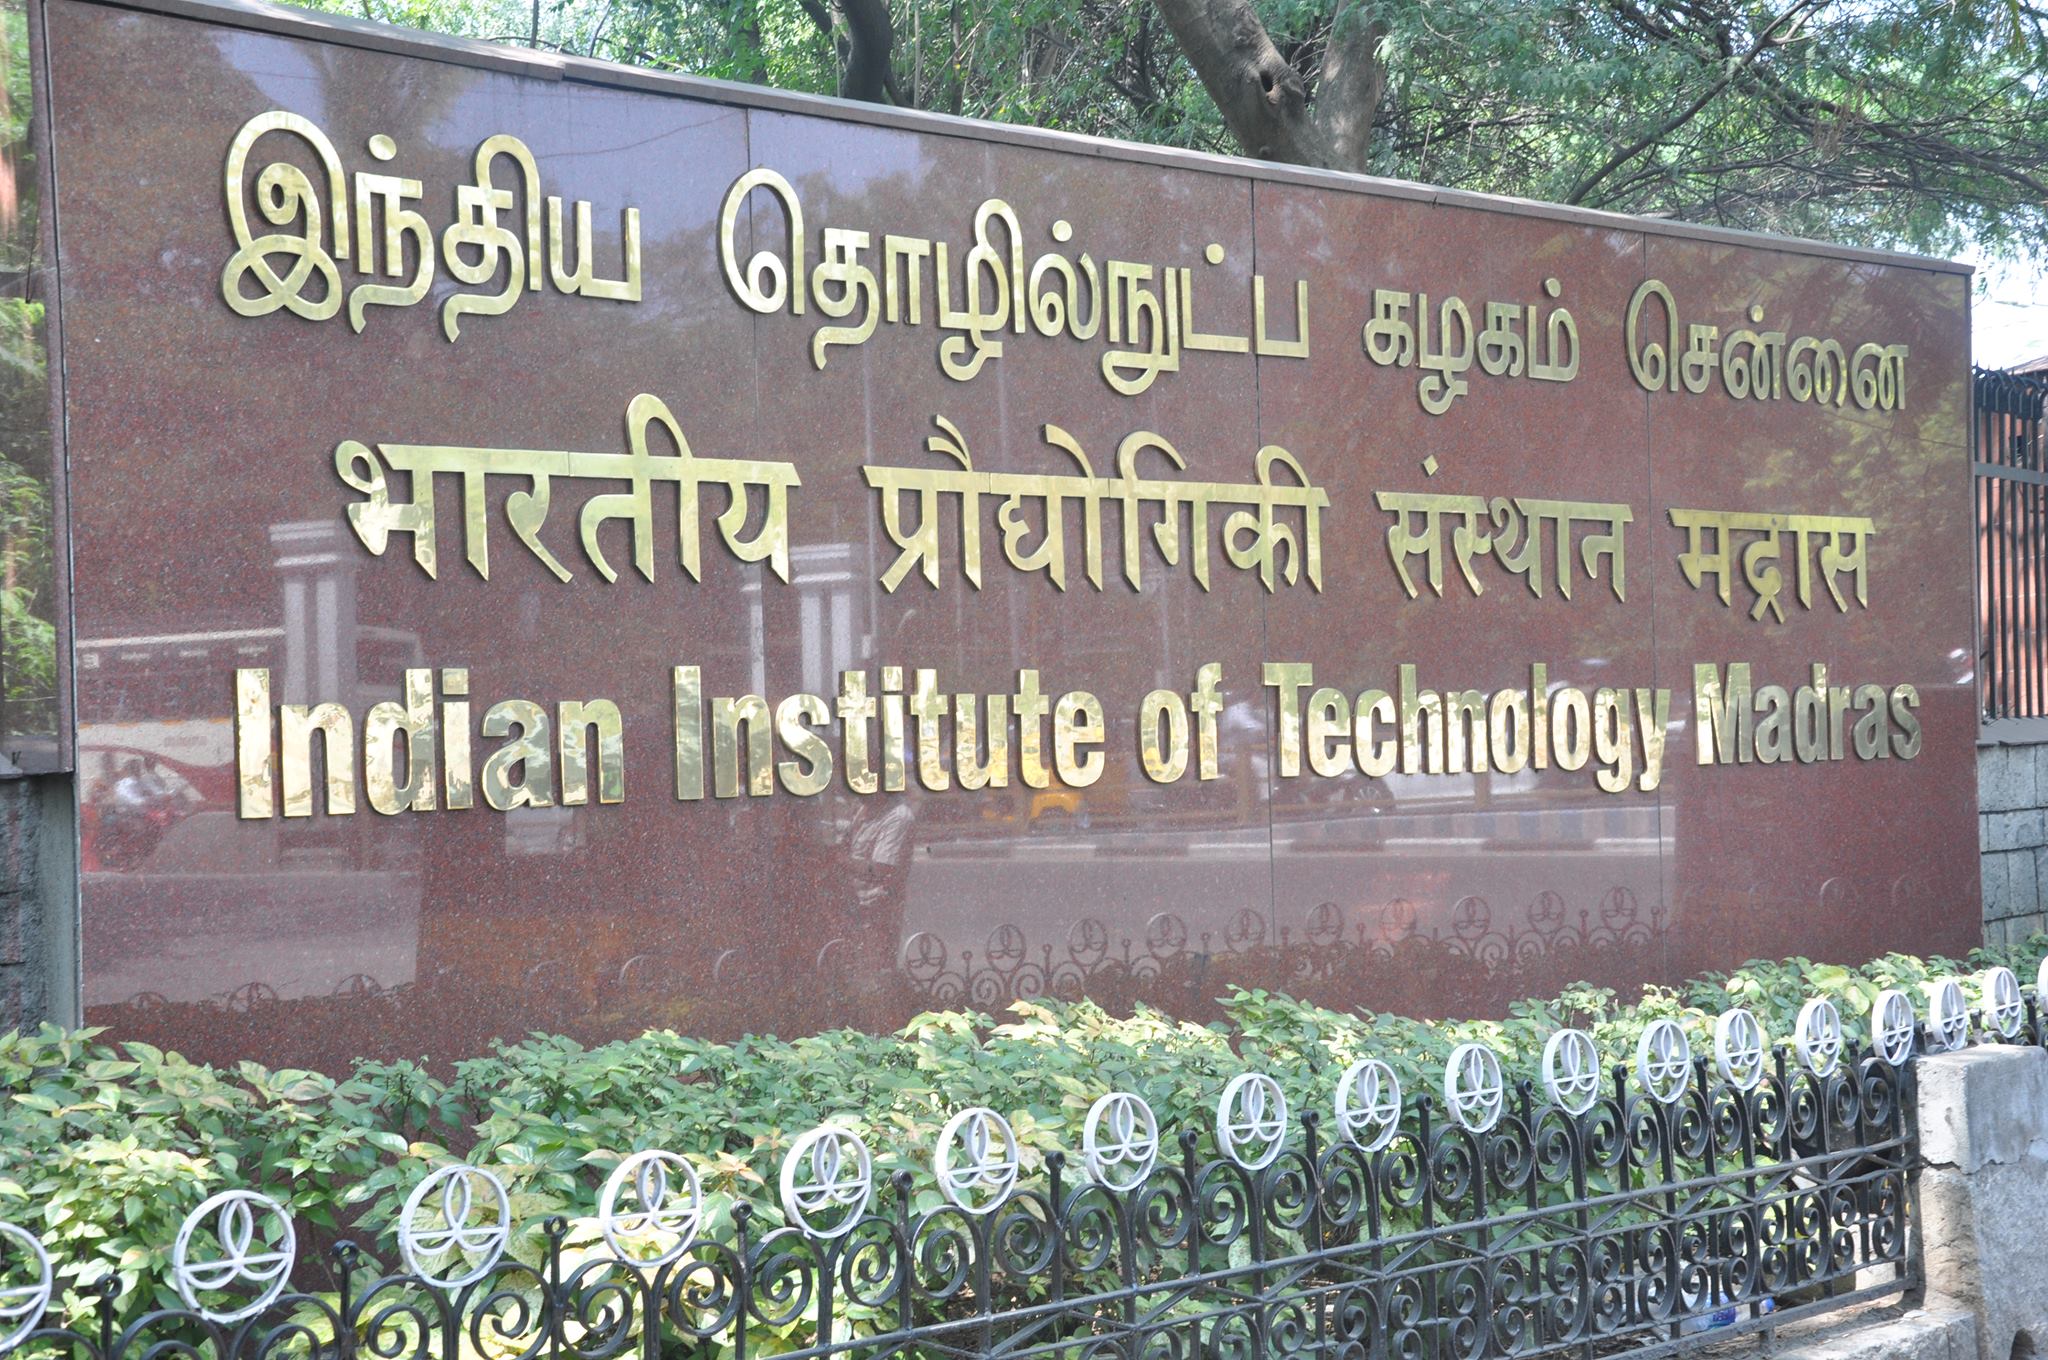 Research by IIT-M